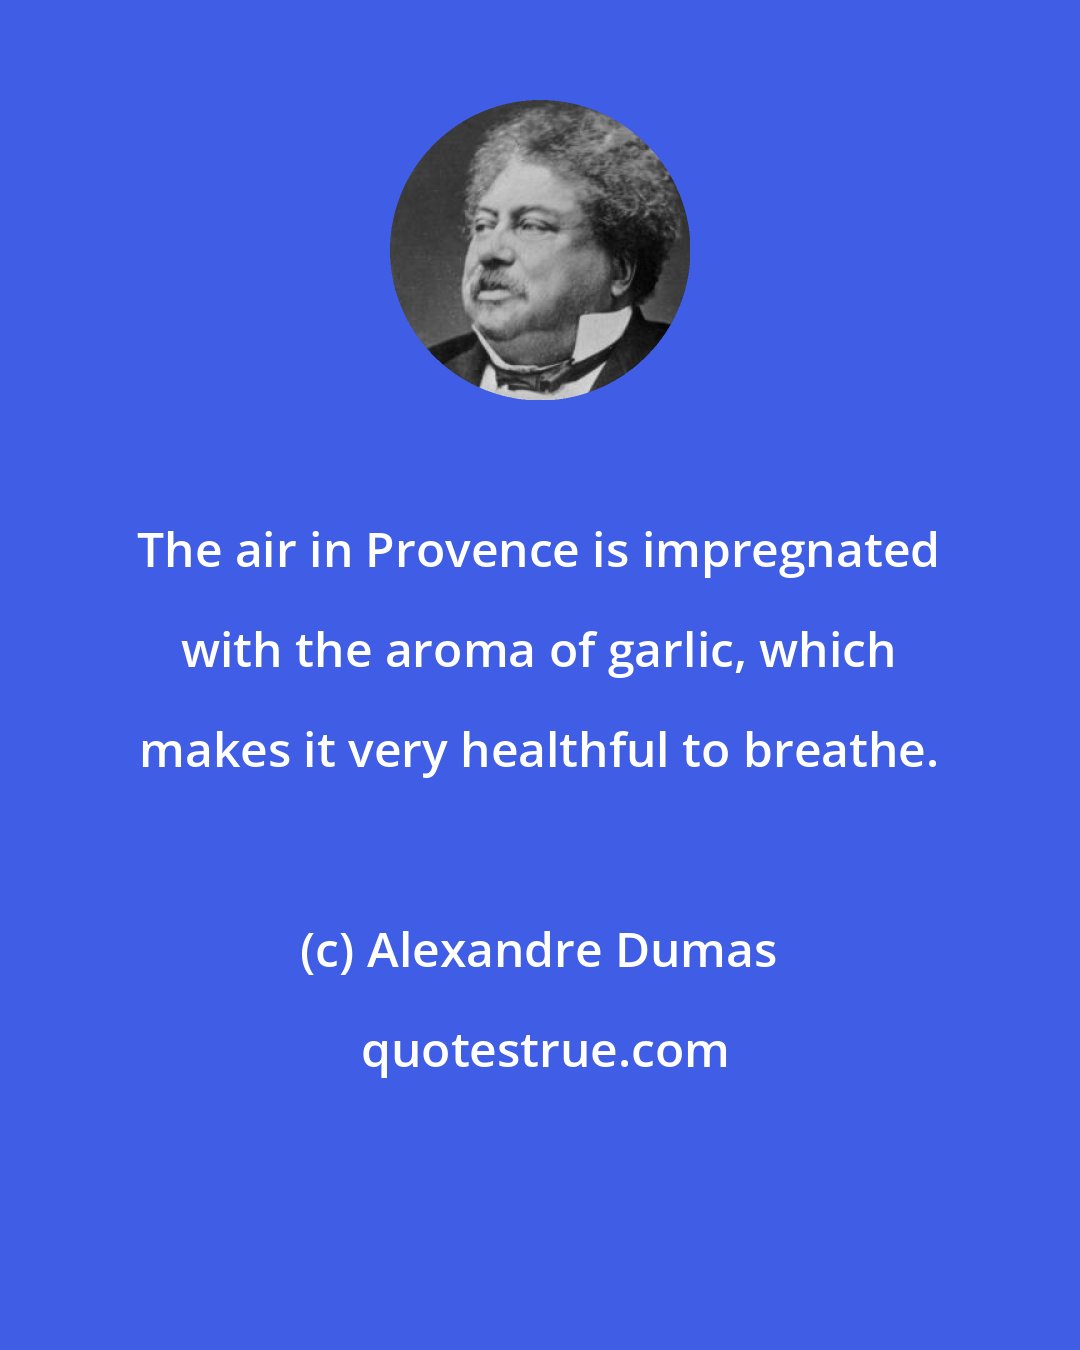 Alexandre Dumas: The air in Provence is impregnated with the aroma of garlic, which makes it very healthful to breathe.